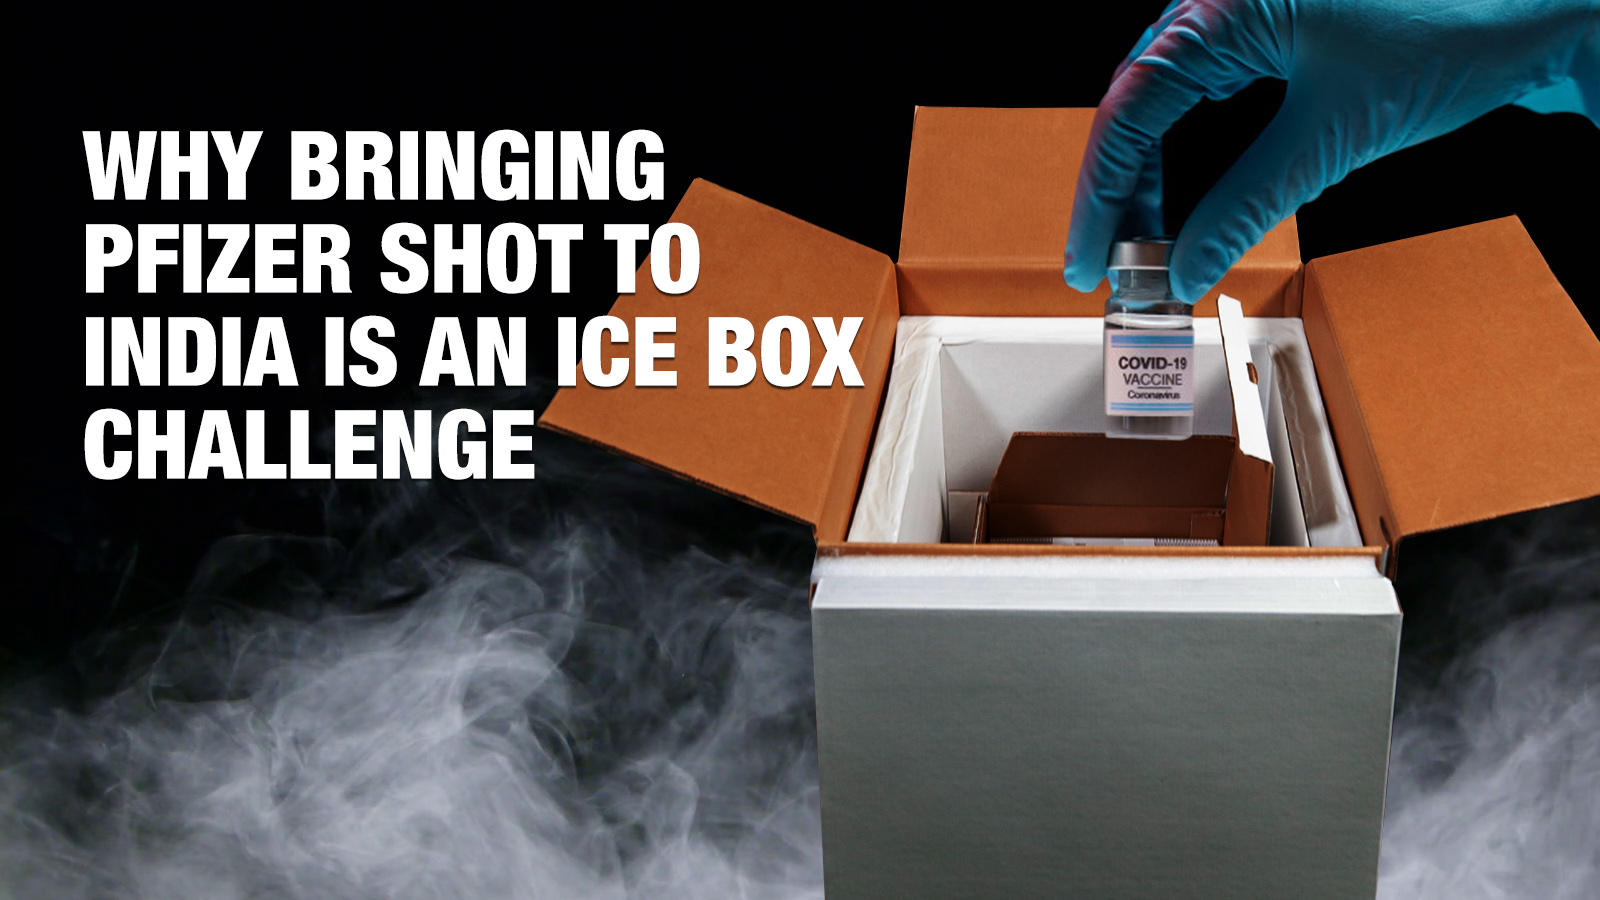 Bringing Pfizer Vaccine To India Poses An Ice Box Challenge Times Of India